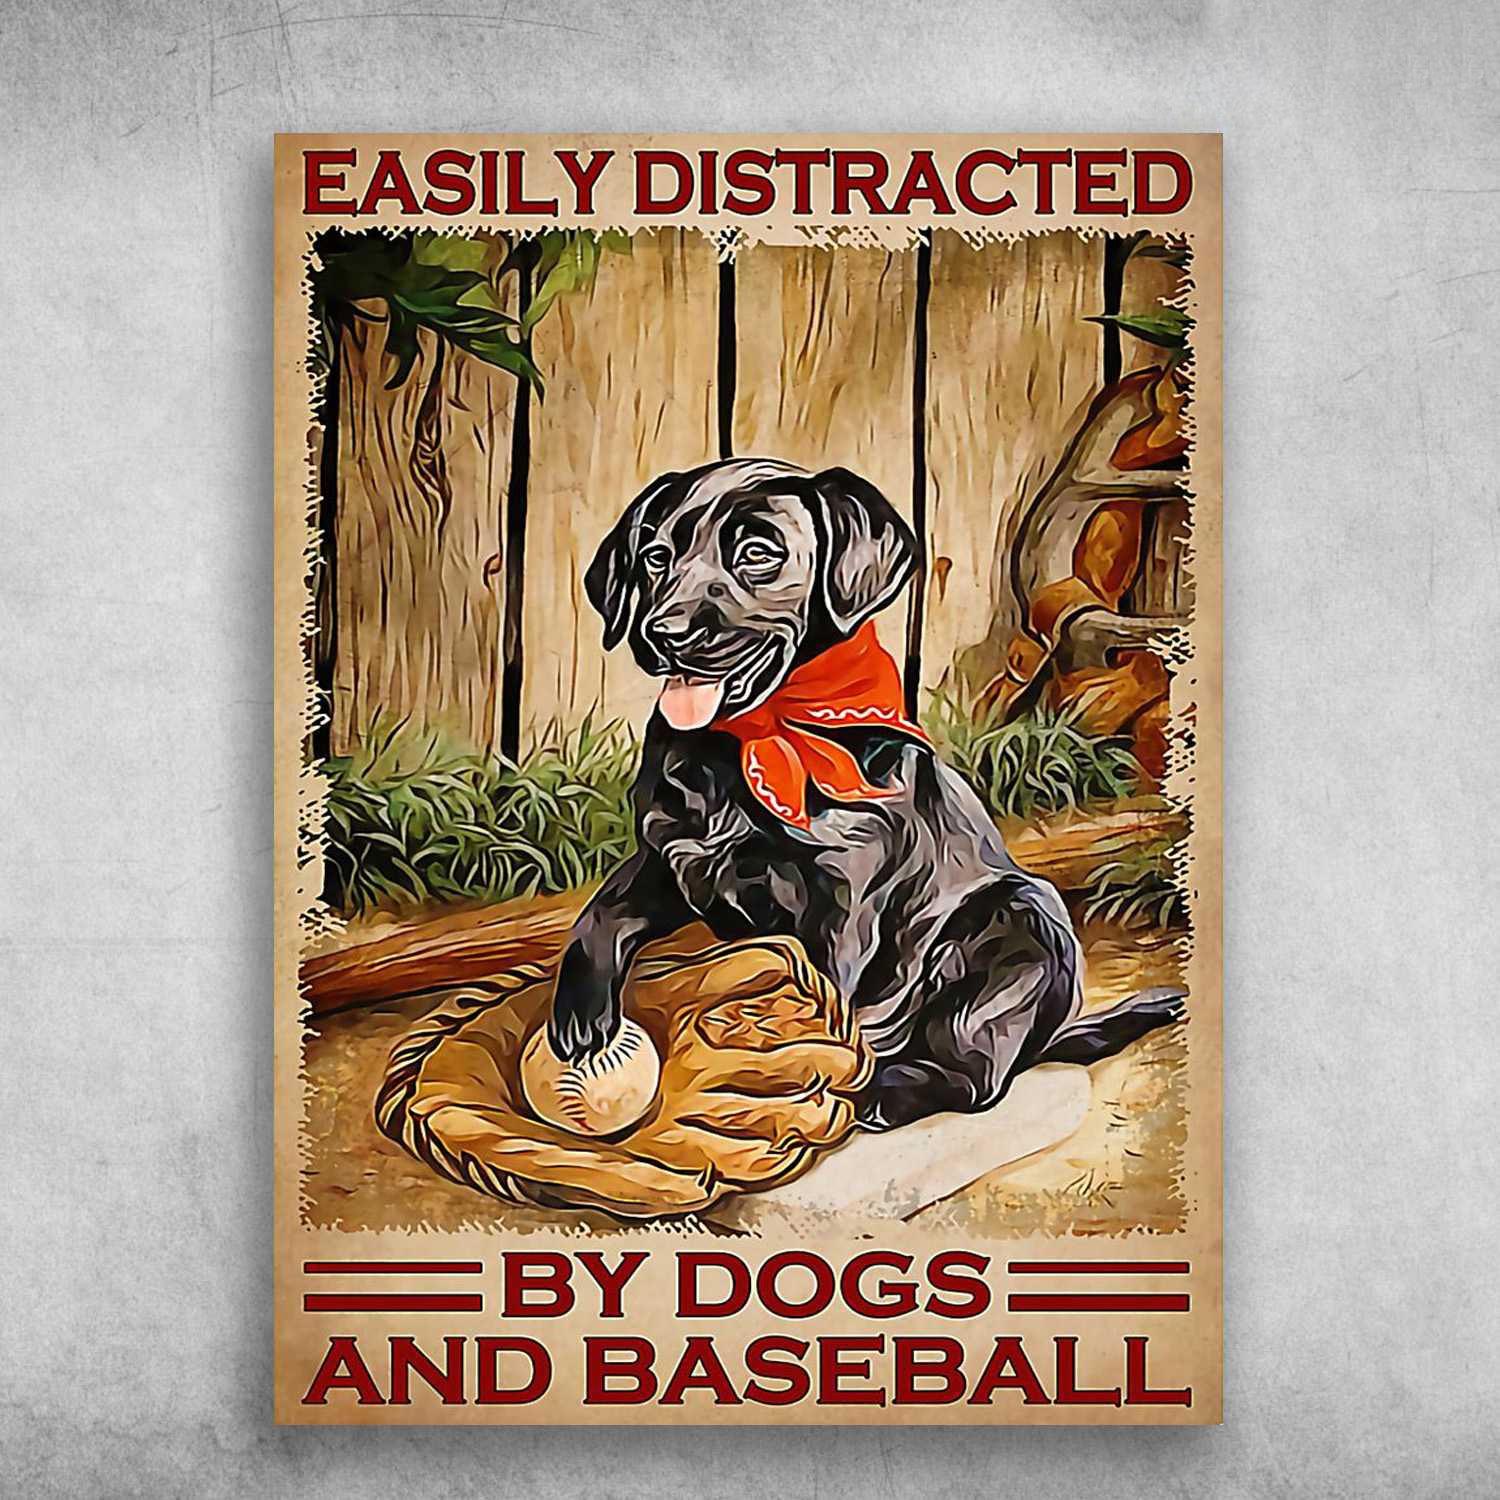 Labrador Retriever Portrait Canvas - Easily Distracted By Dogs And Baseball - Gift For Dog Lovers, Family, Friends Portrait Canvas, Wall Decor Visual Art - Amzanimalsgift